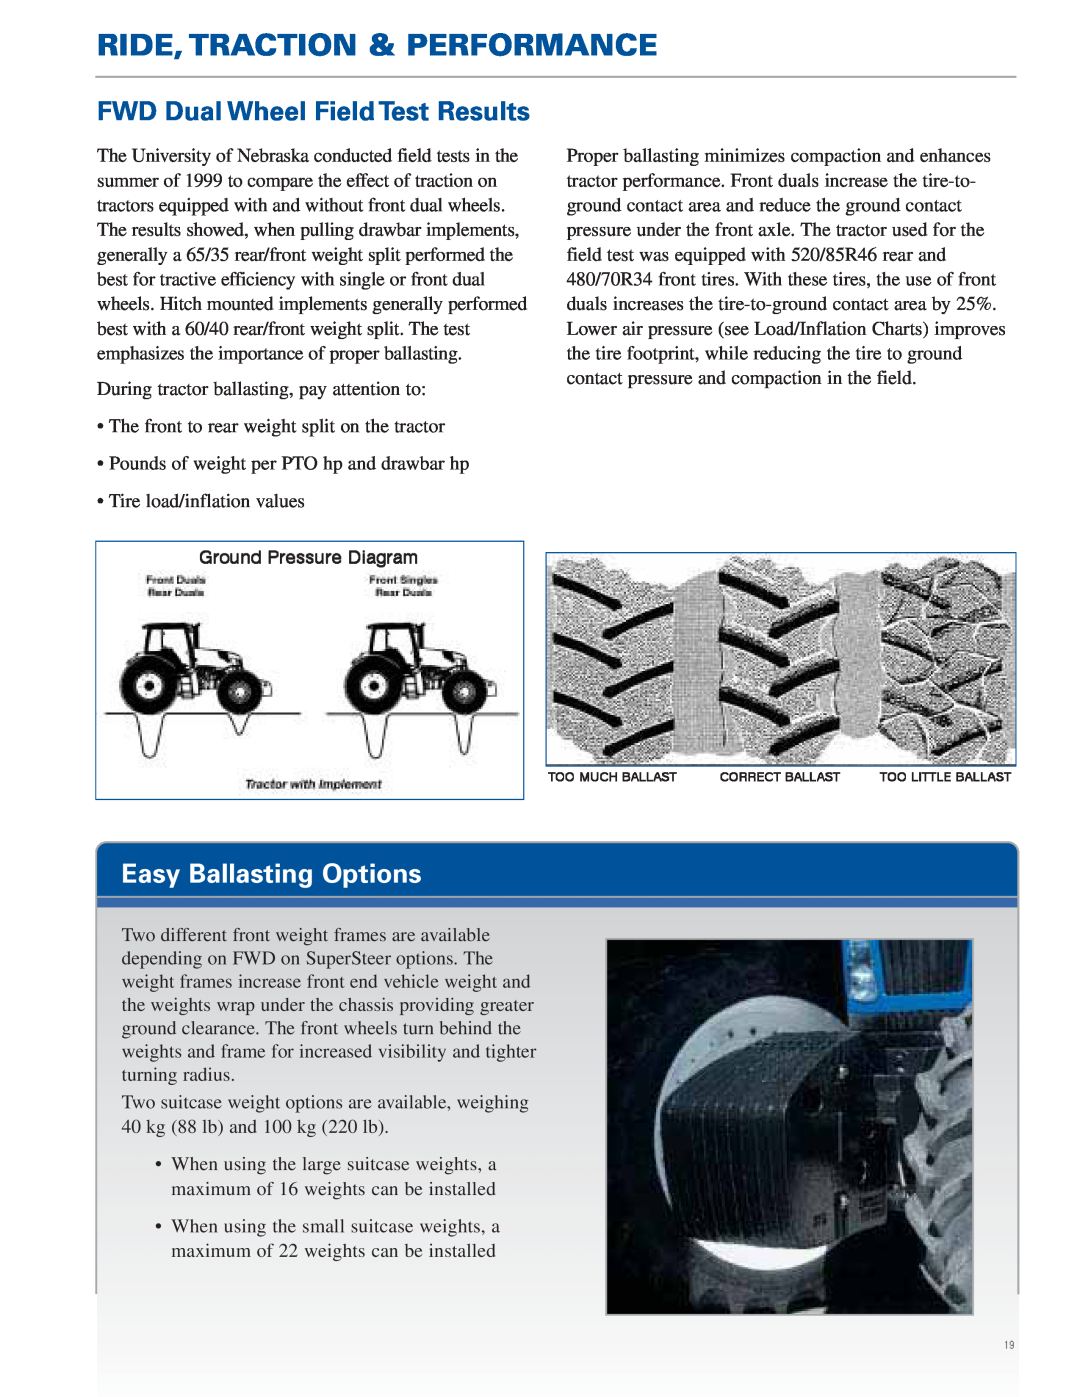 New Holland TG Series, TJ Series manual FWD Dual Wheel Field Test Results, Easy Ballasting, Ride, Traction & Performance 